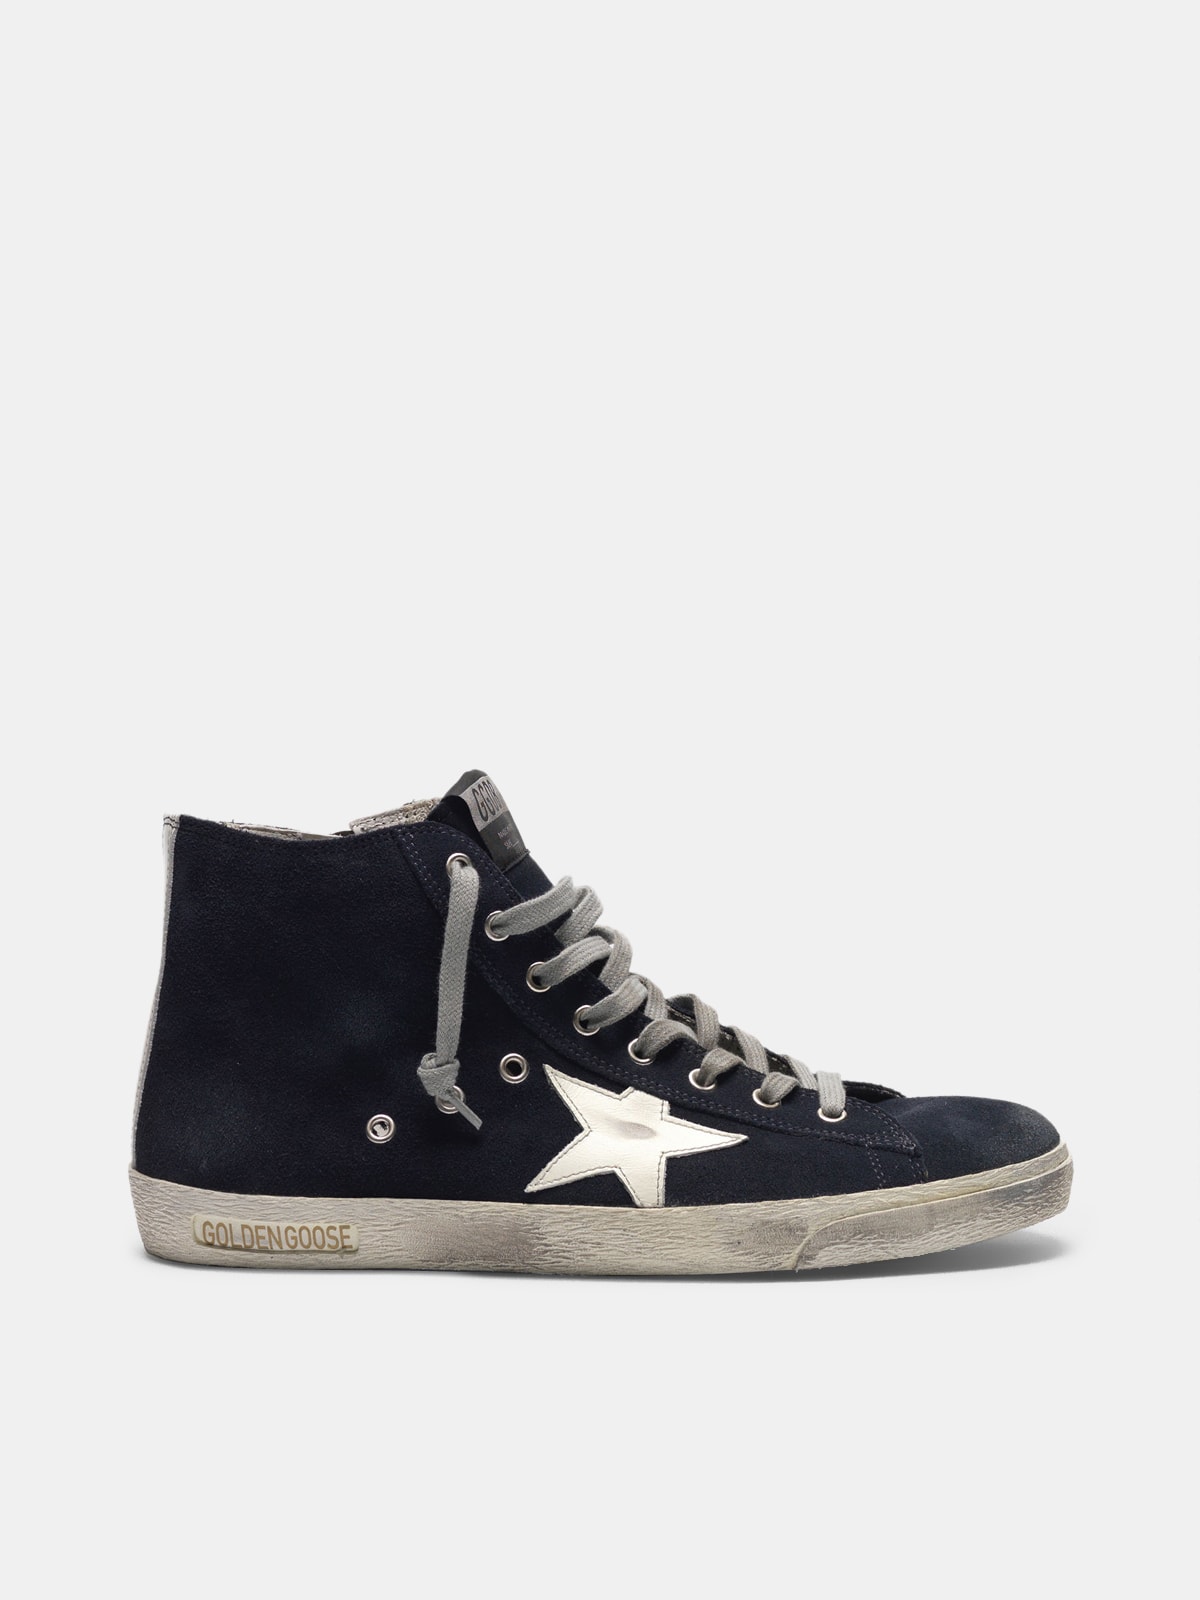 Francy sneakers in leather with leather star and heel tab | Golden Goose